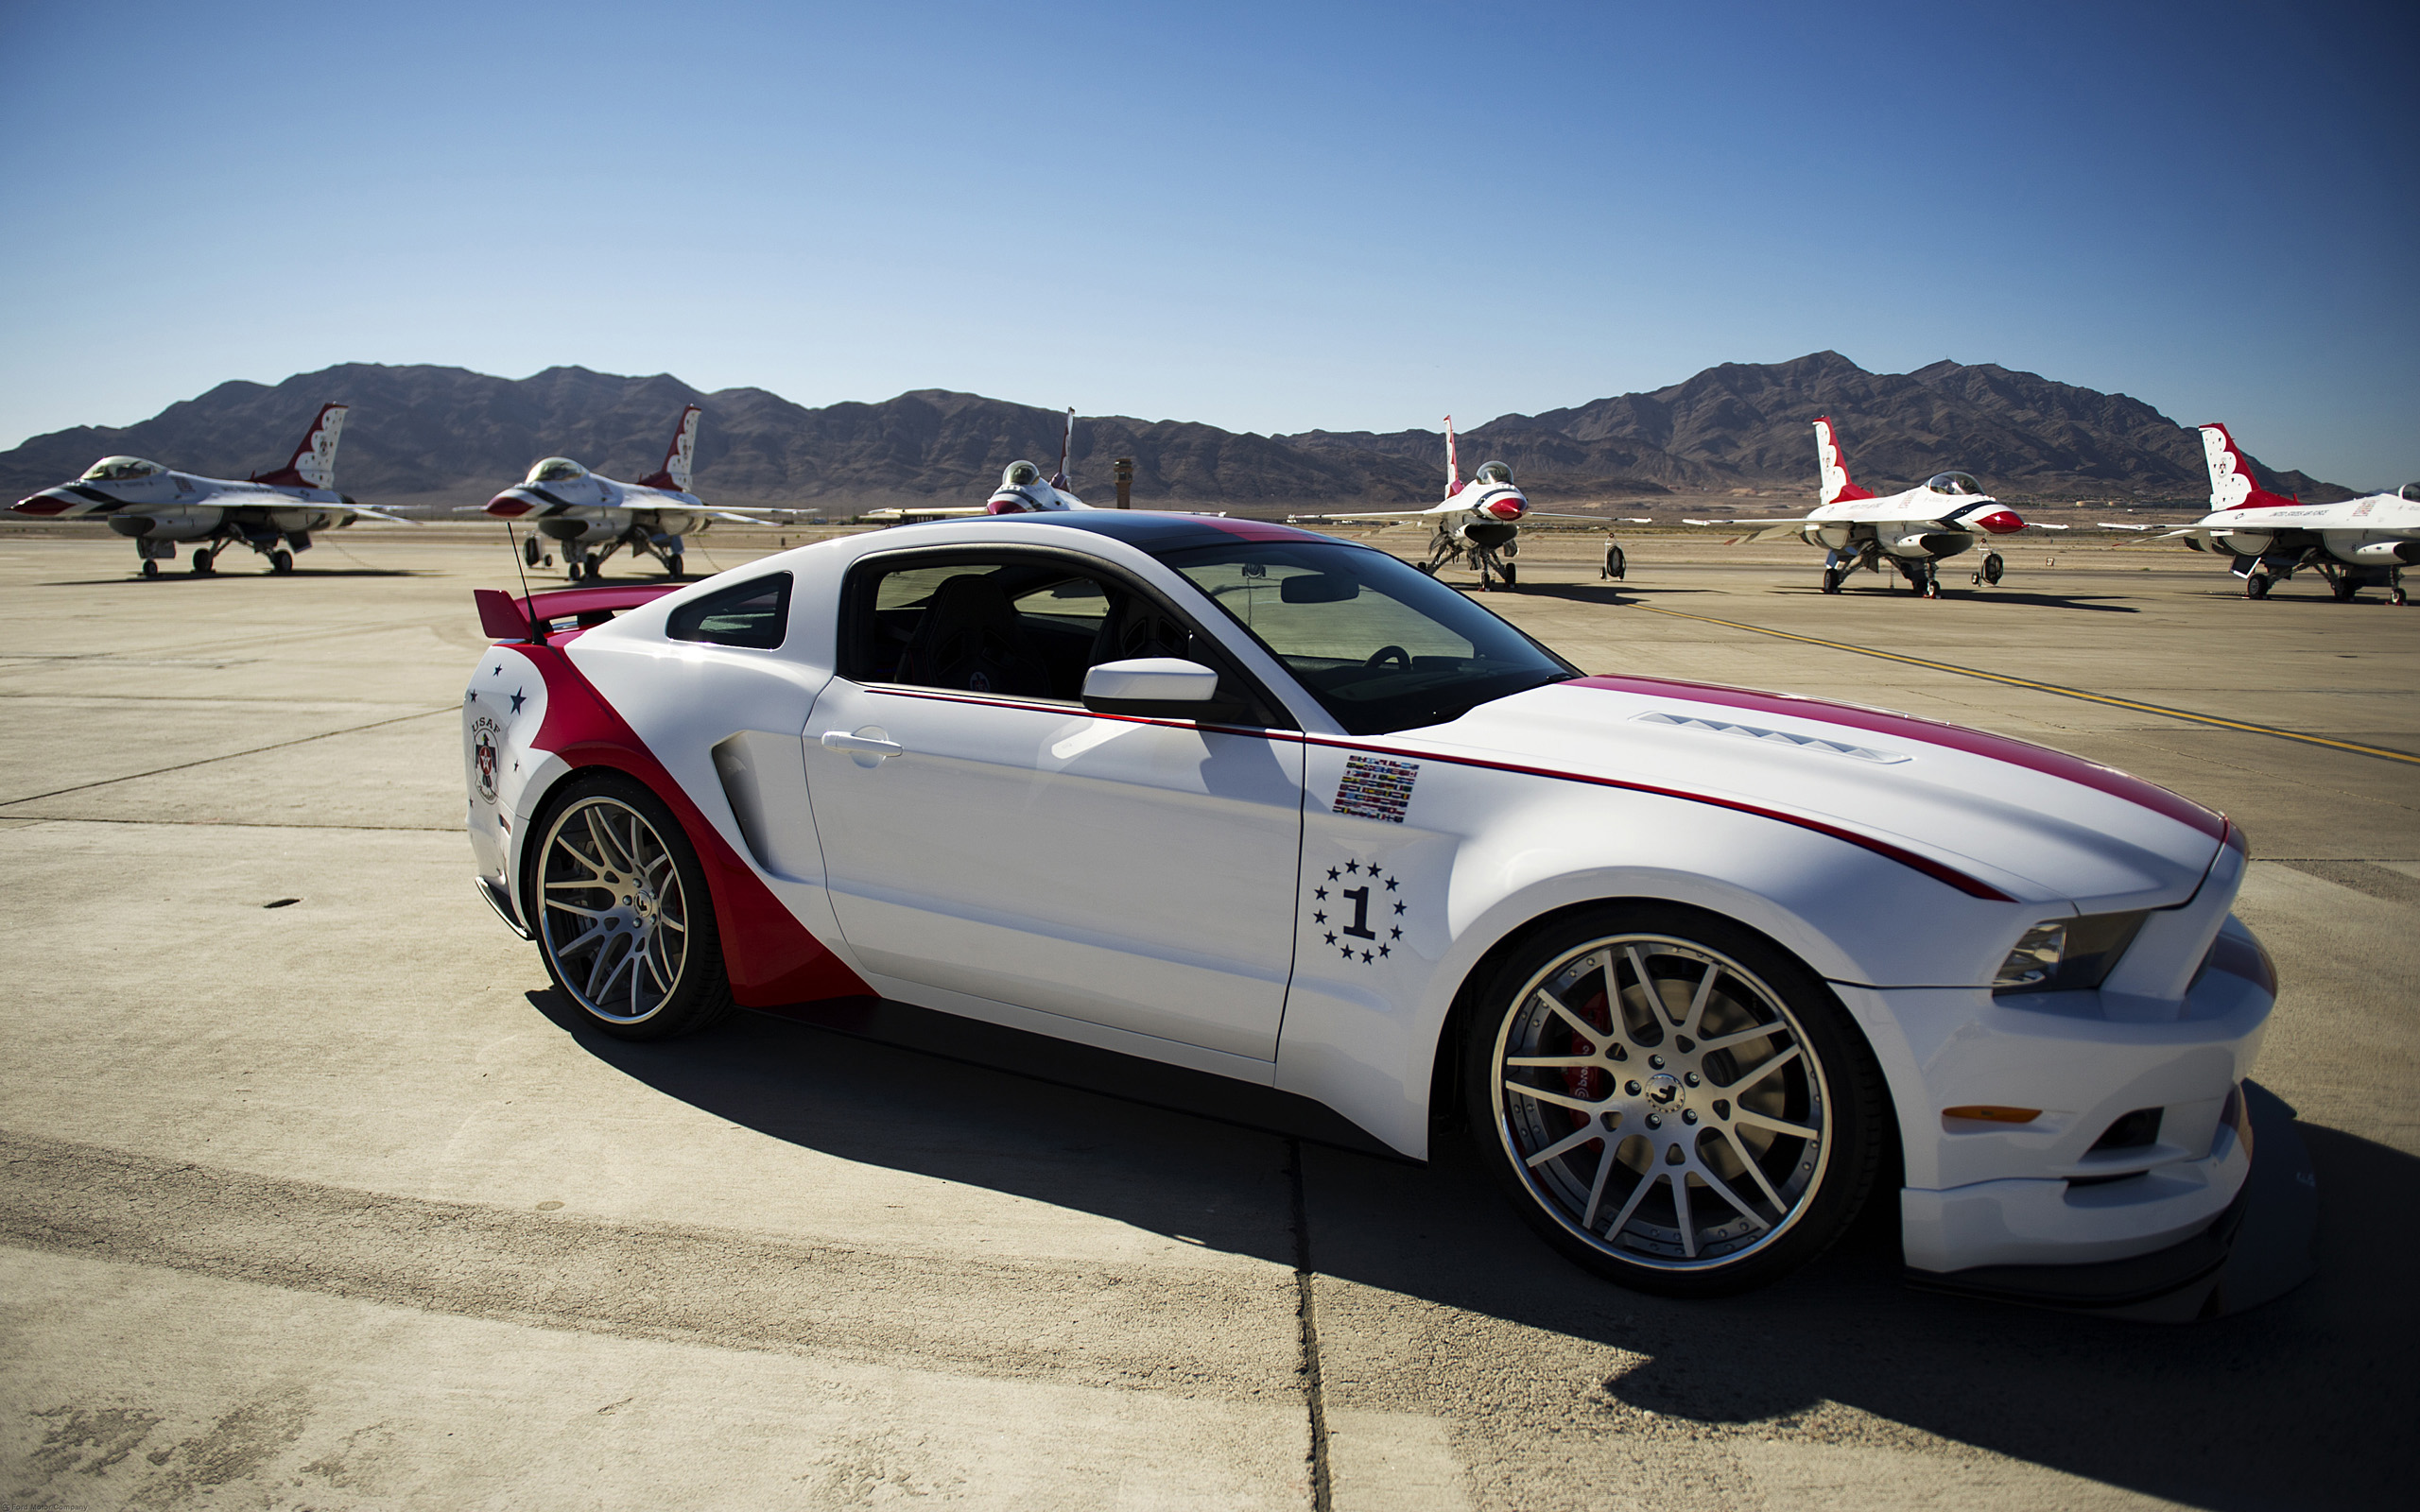 Usaf ford mustang #7